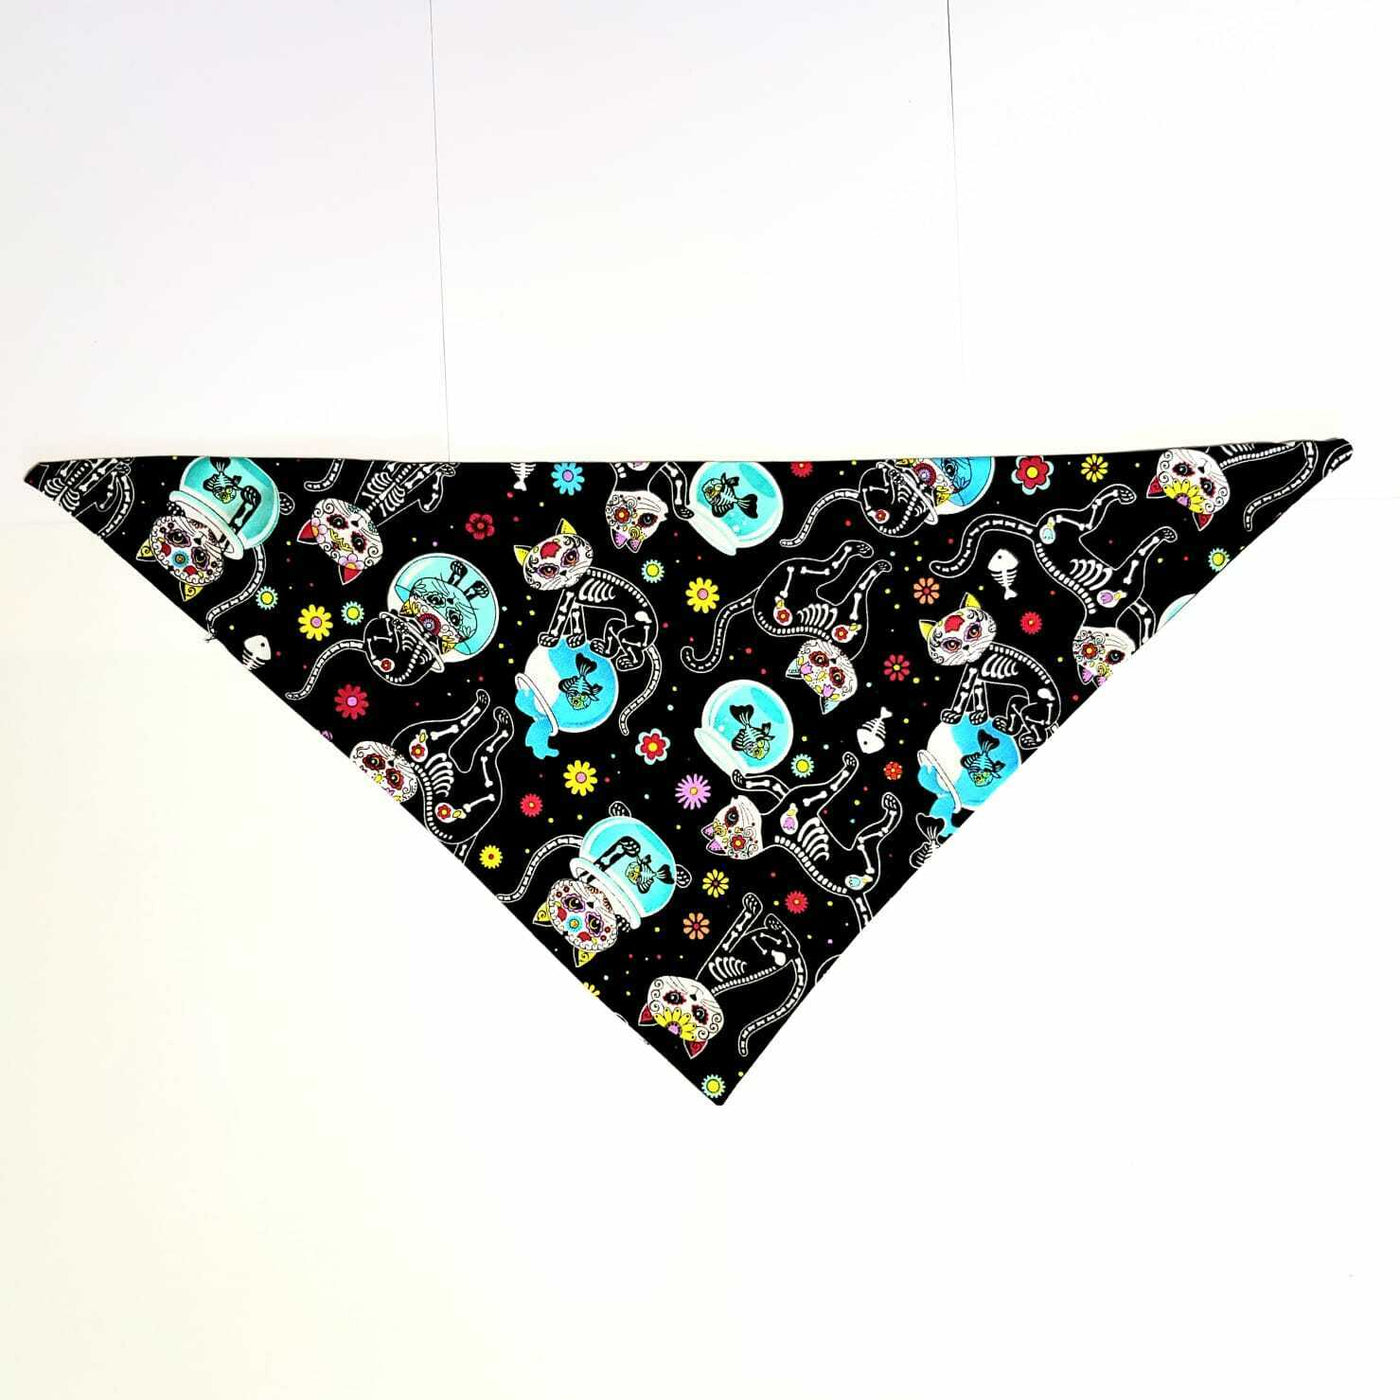 Day of the Dead Skeleton Cats Neckerchief - 100% Cotton Fabric